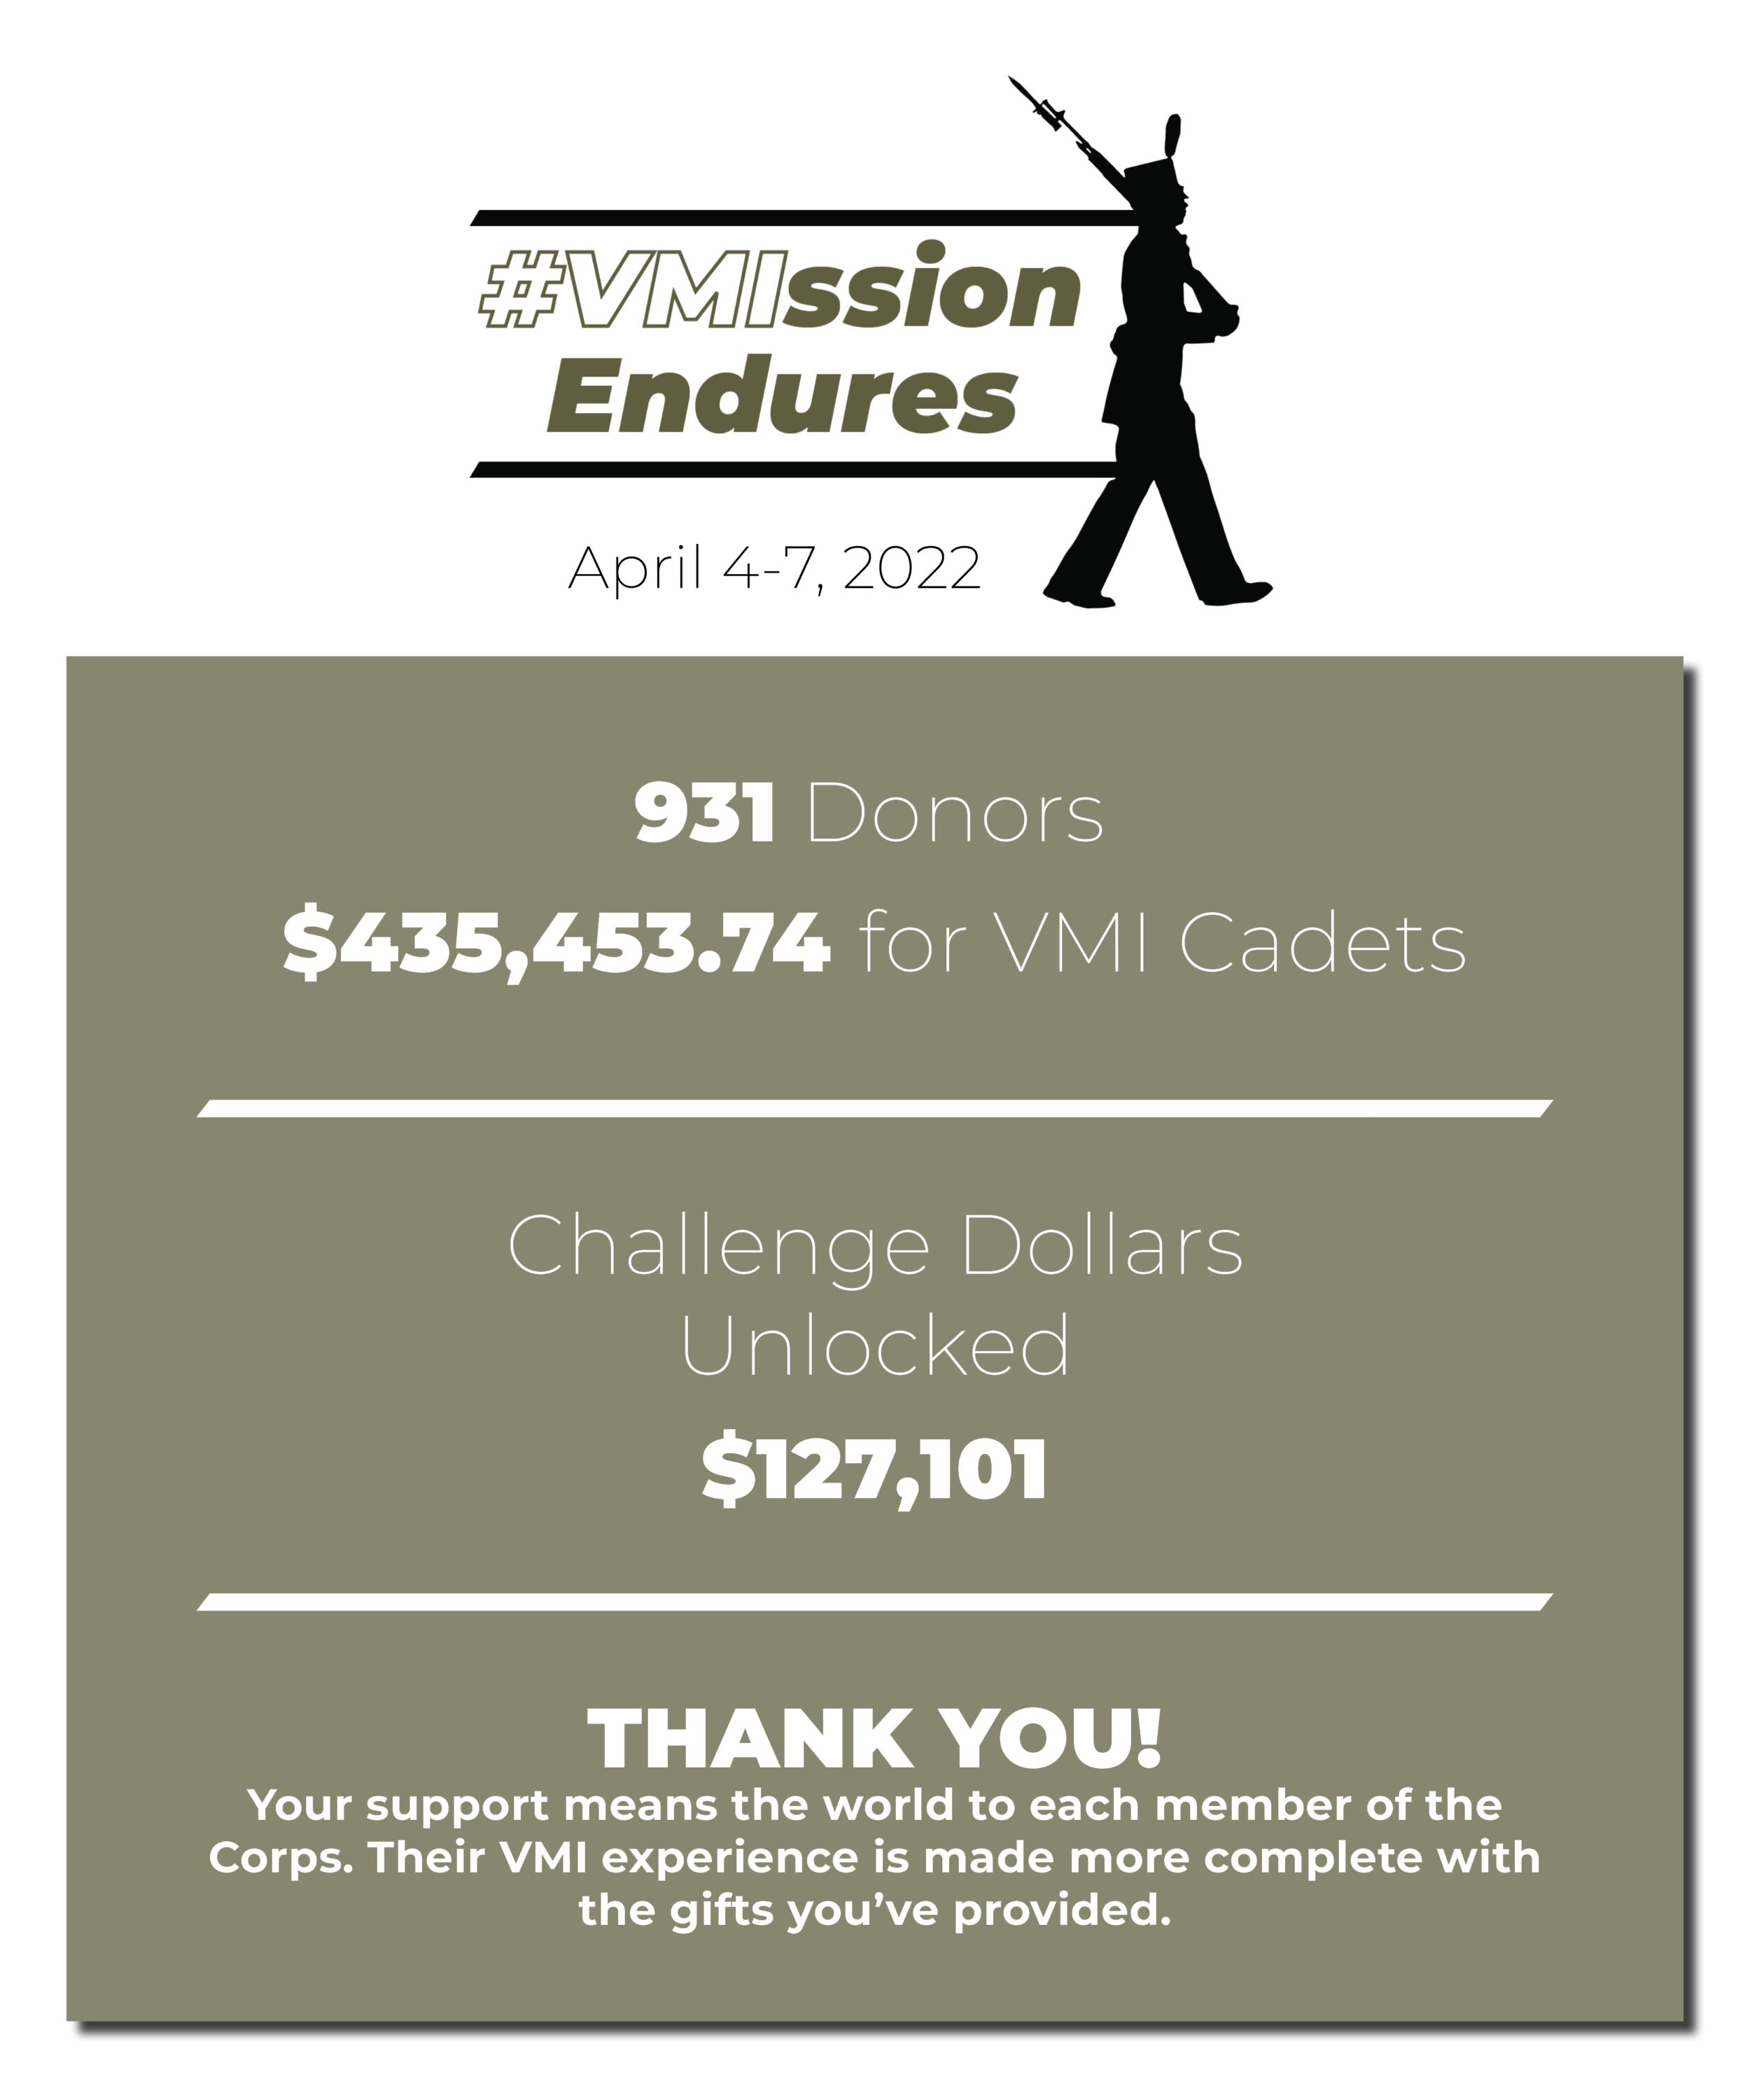 931 Donors $435,453.74 for VMI Cadets Challenge Dollars Unlocked $127,101 THANK YOU! Your support means the world to each member of the Corps. Their VMI experience is made more complete with the gifts you've provided.